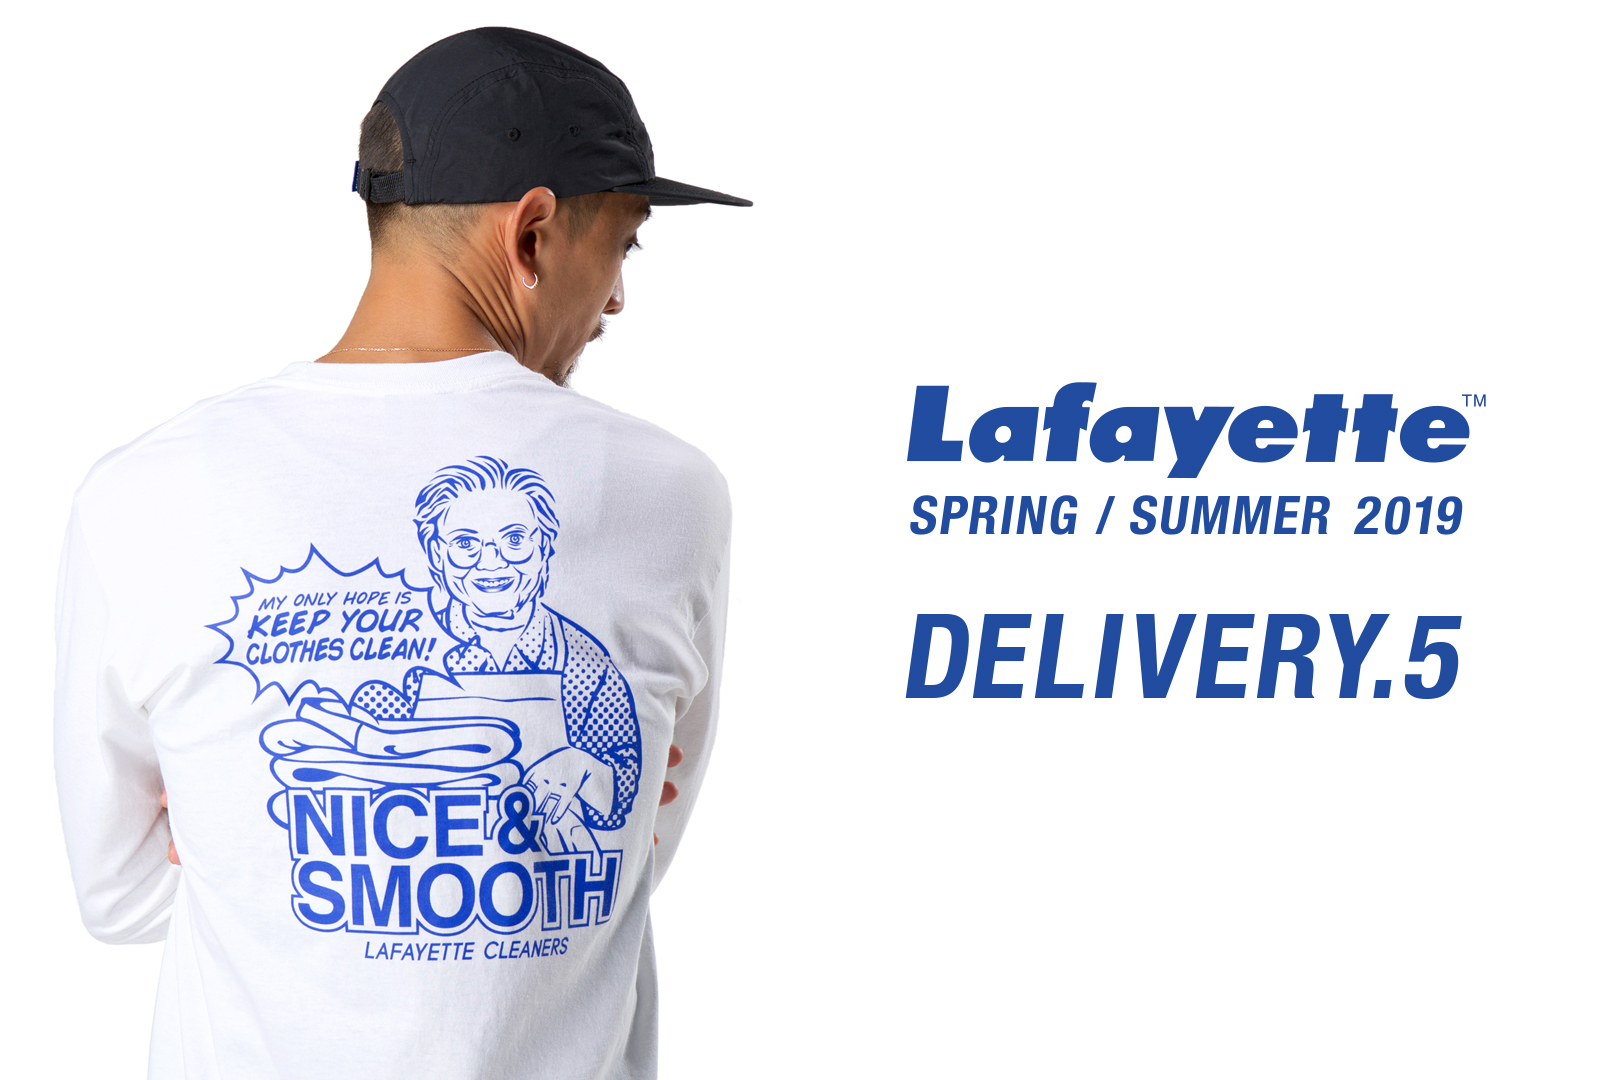 Lafayette 2019 Spring/Summer Collection Delivery.5